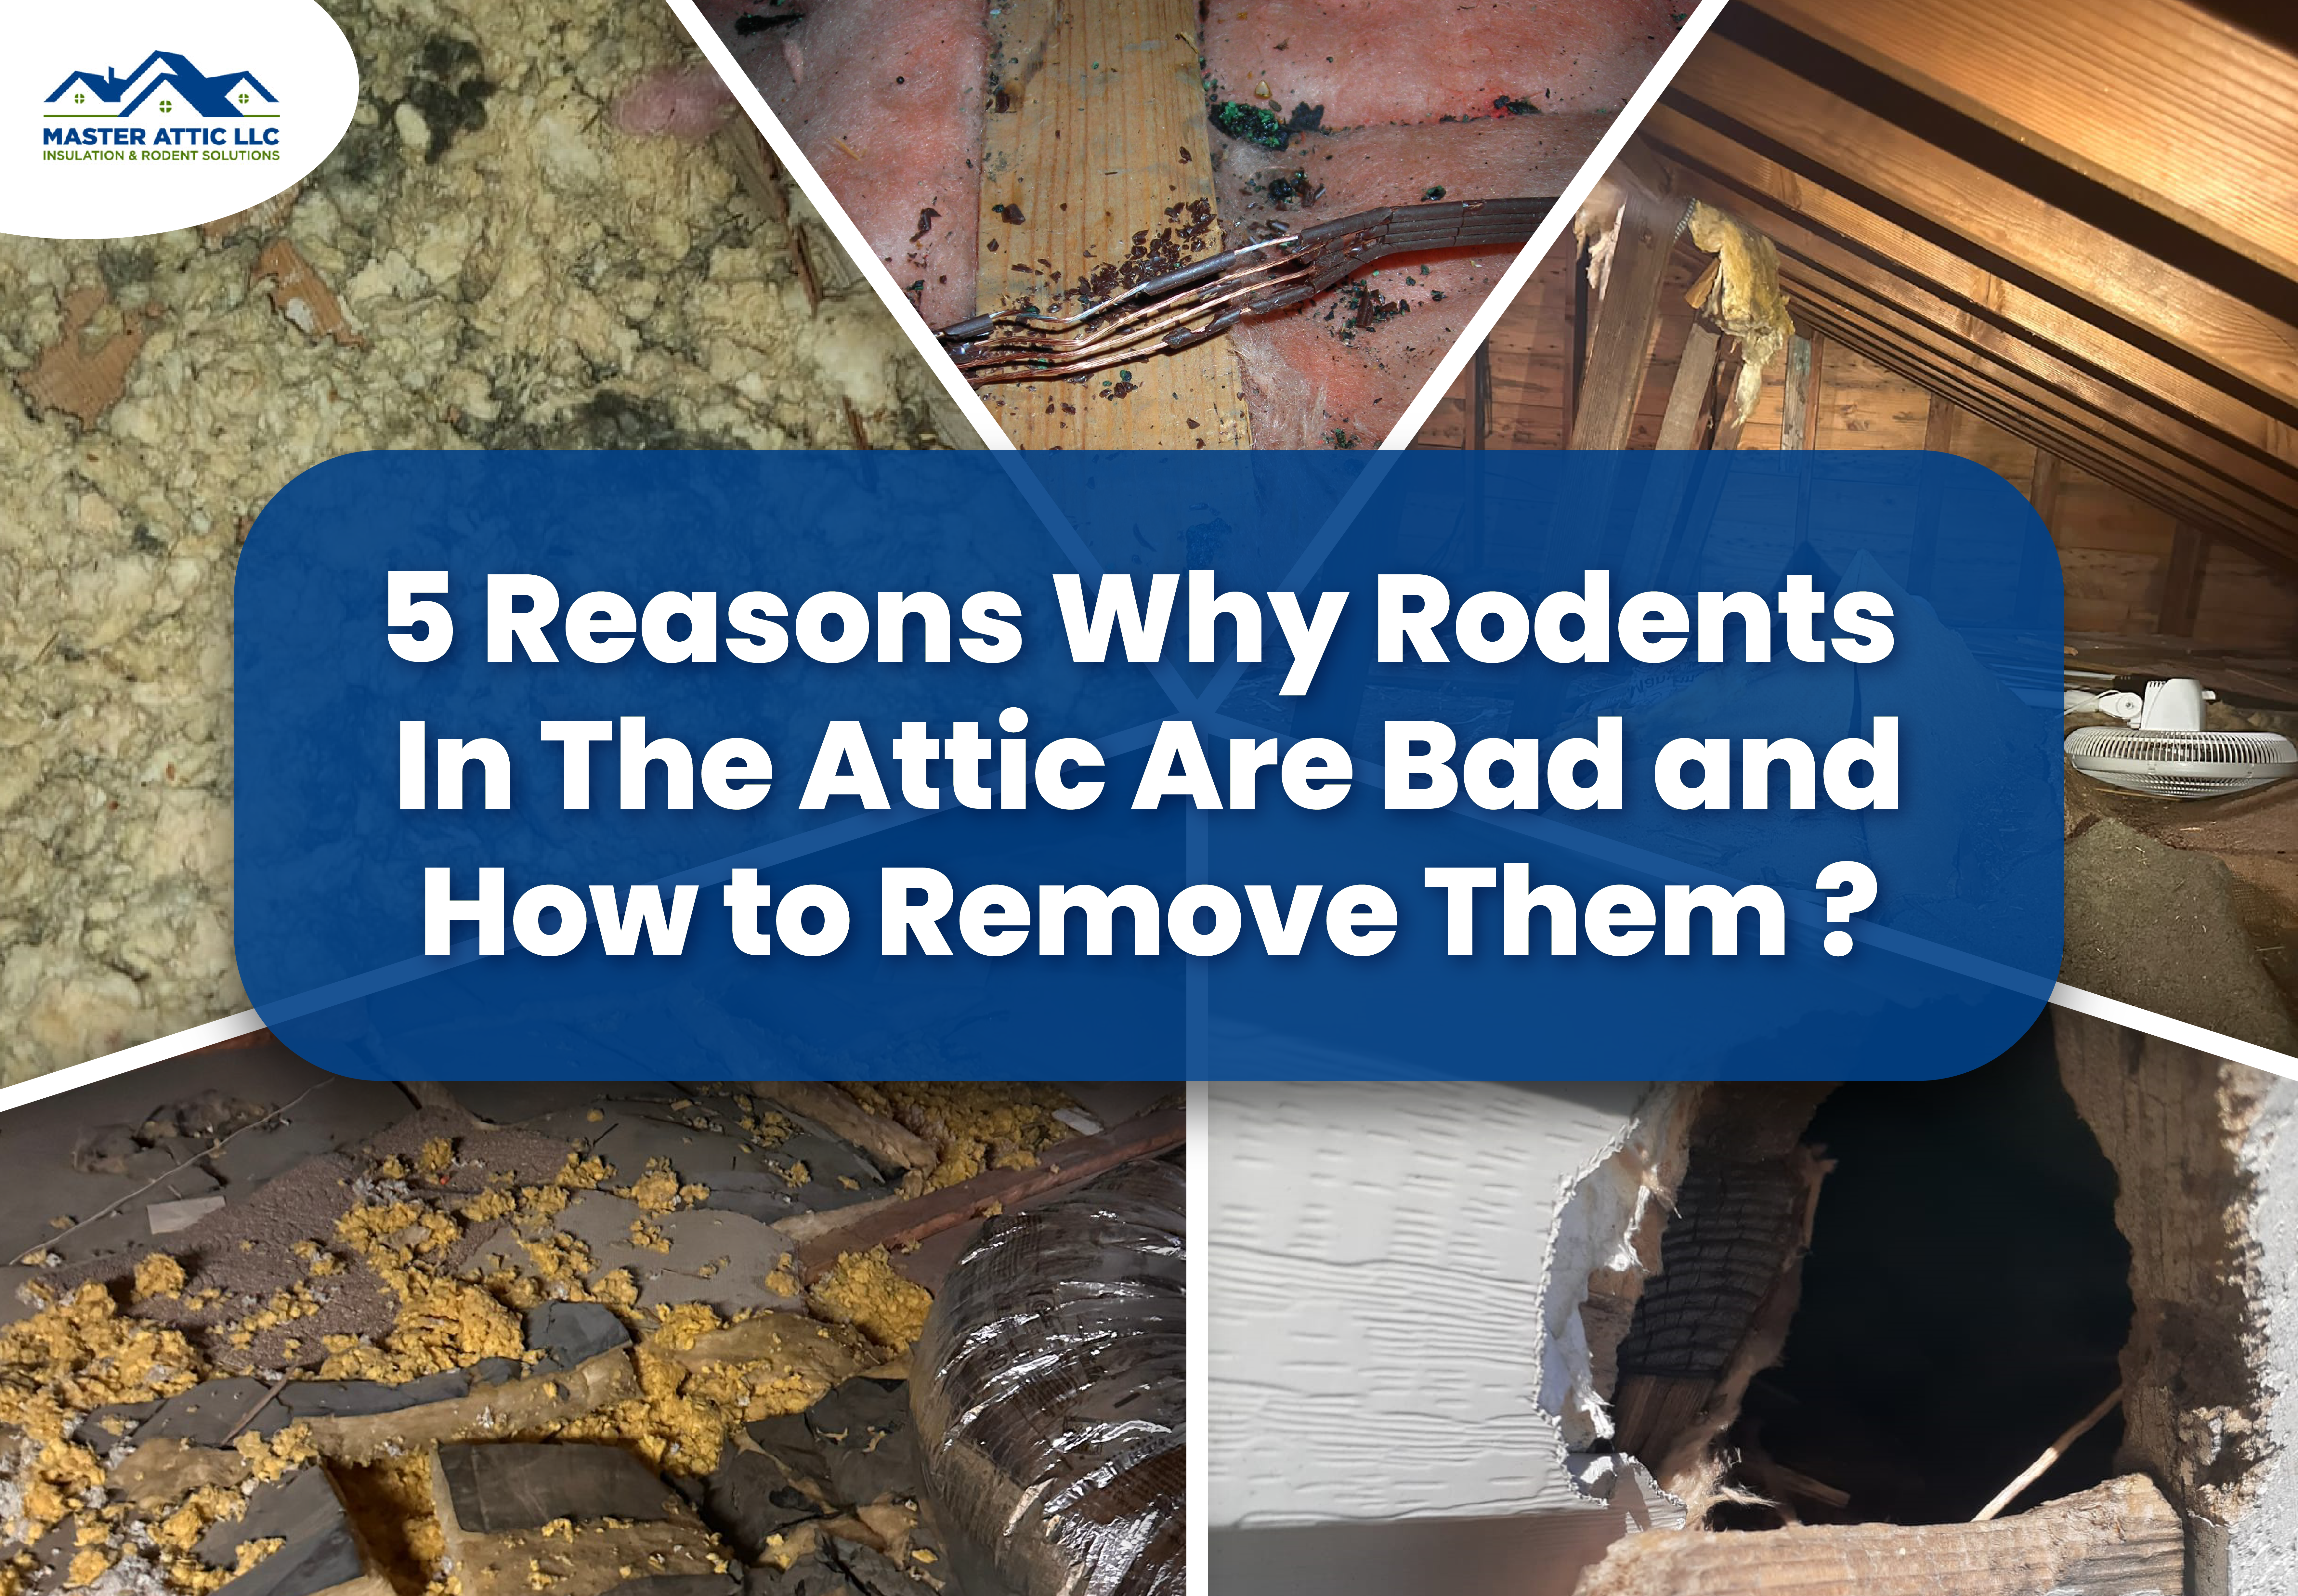 5 Reasons Why Rodents In the attic are bad and how to remove them